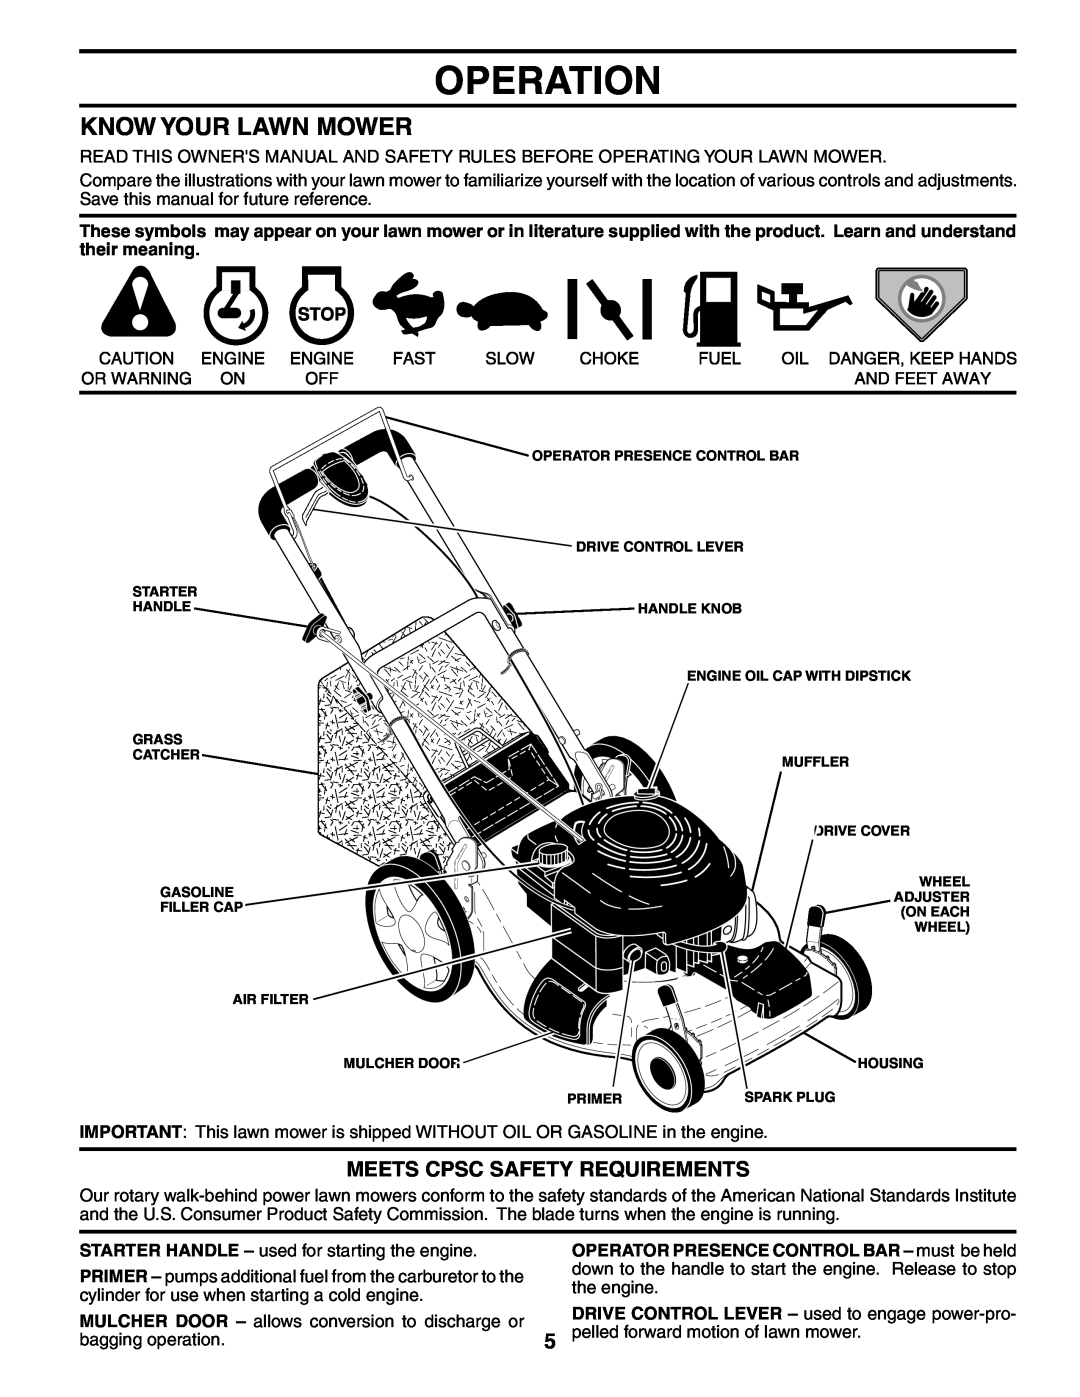 Husqvarna 6522SH owner manual Operation, Know Your Lawn Mower, Meets Cpsc Safety Requirements 